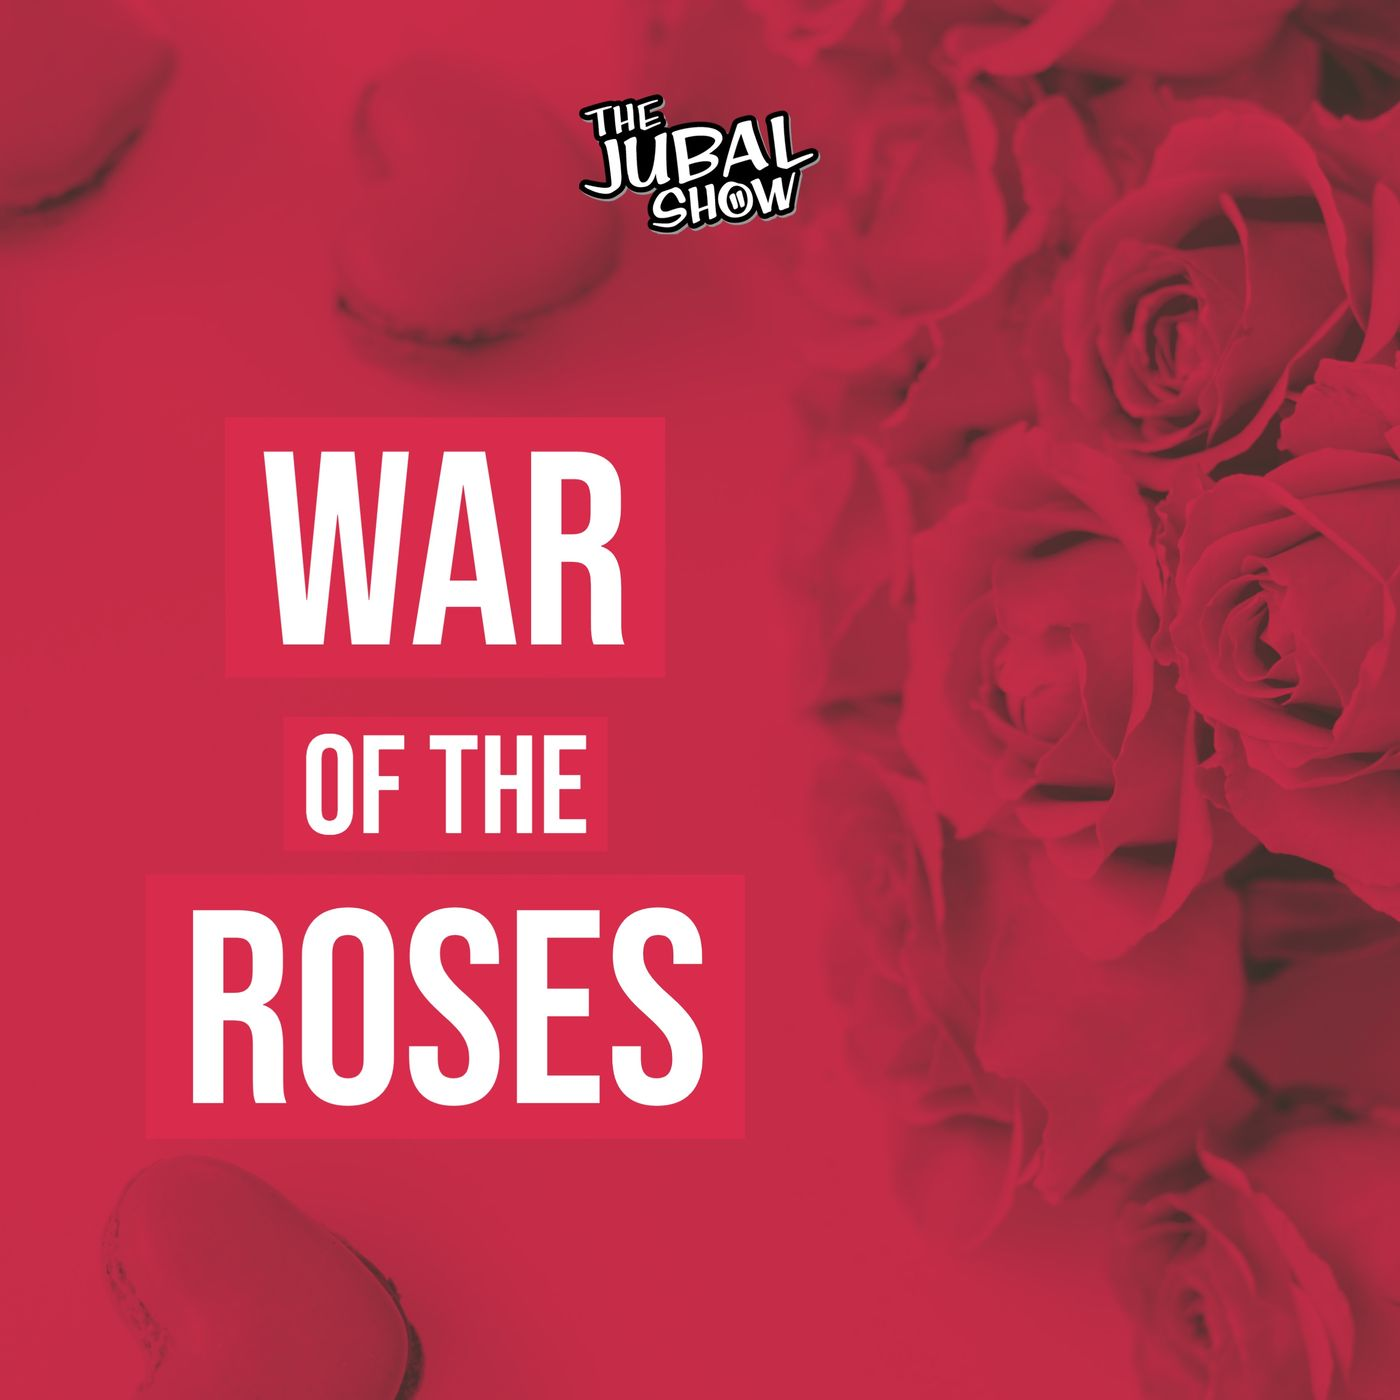 The Jubal Show hits the gas station to find a cheater in War of The Roses!